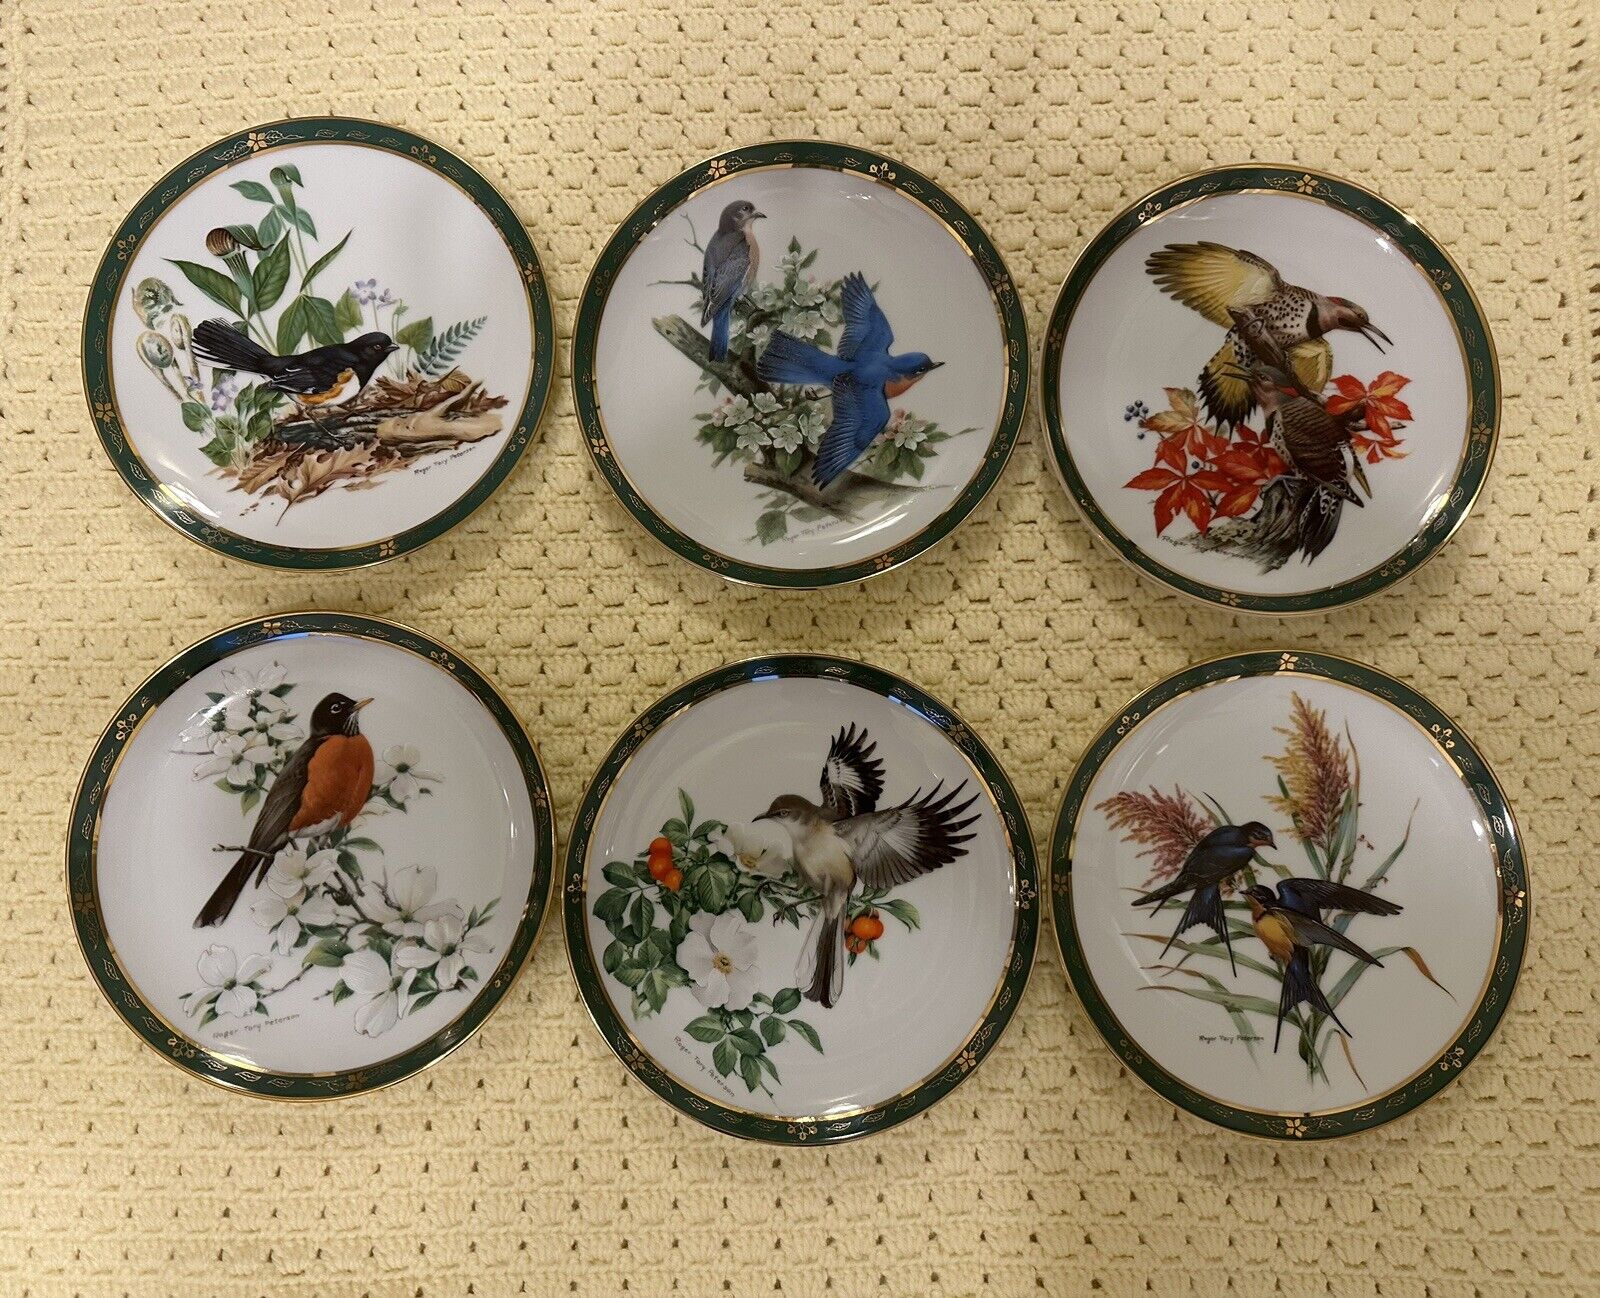 Songbirds Of Roger Tory Peterson Set Of 6 Bird Plates, The Danbury Mint 1990